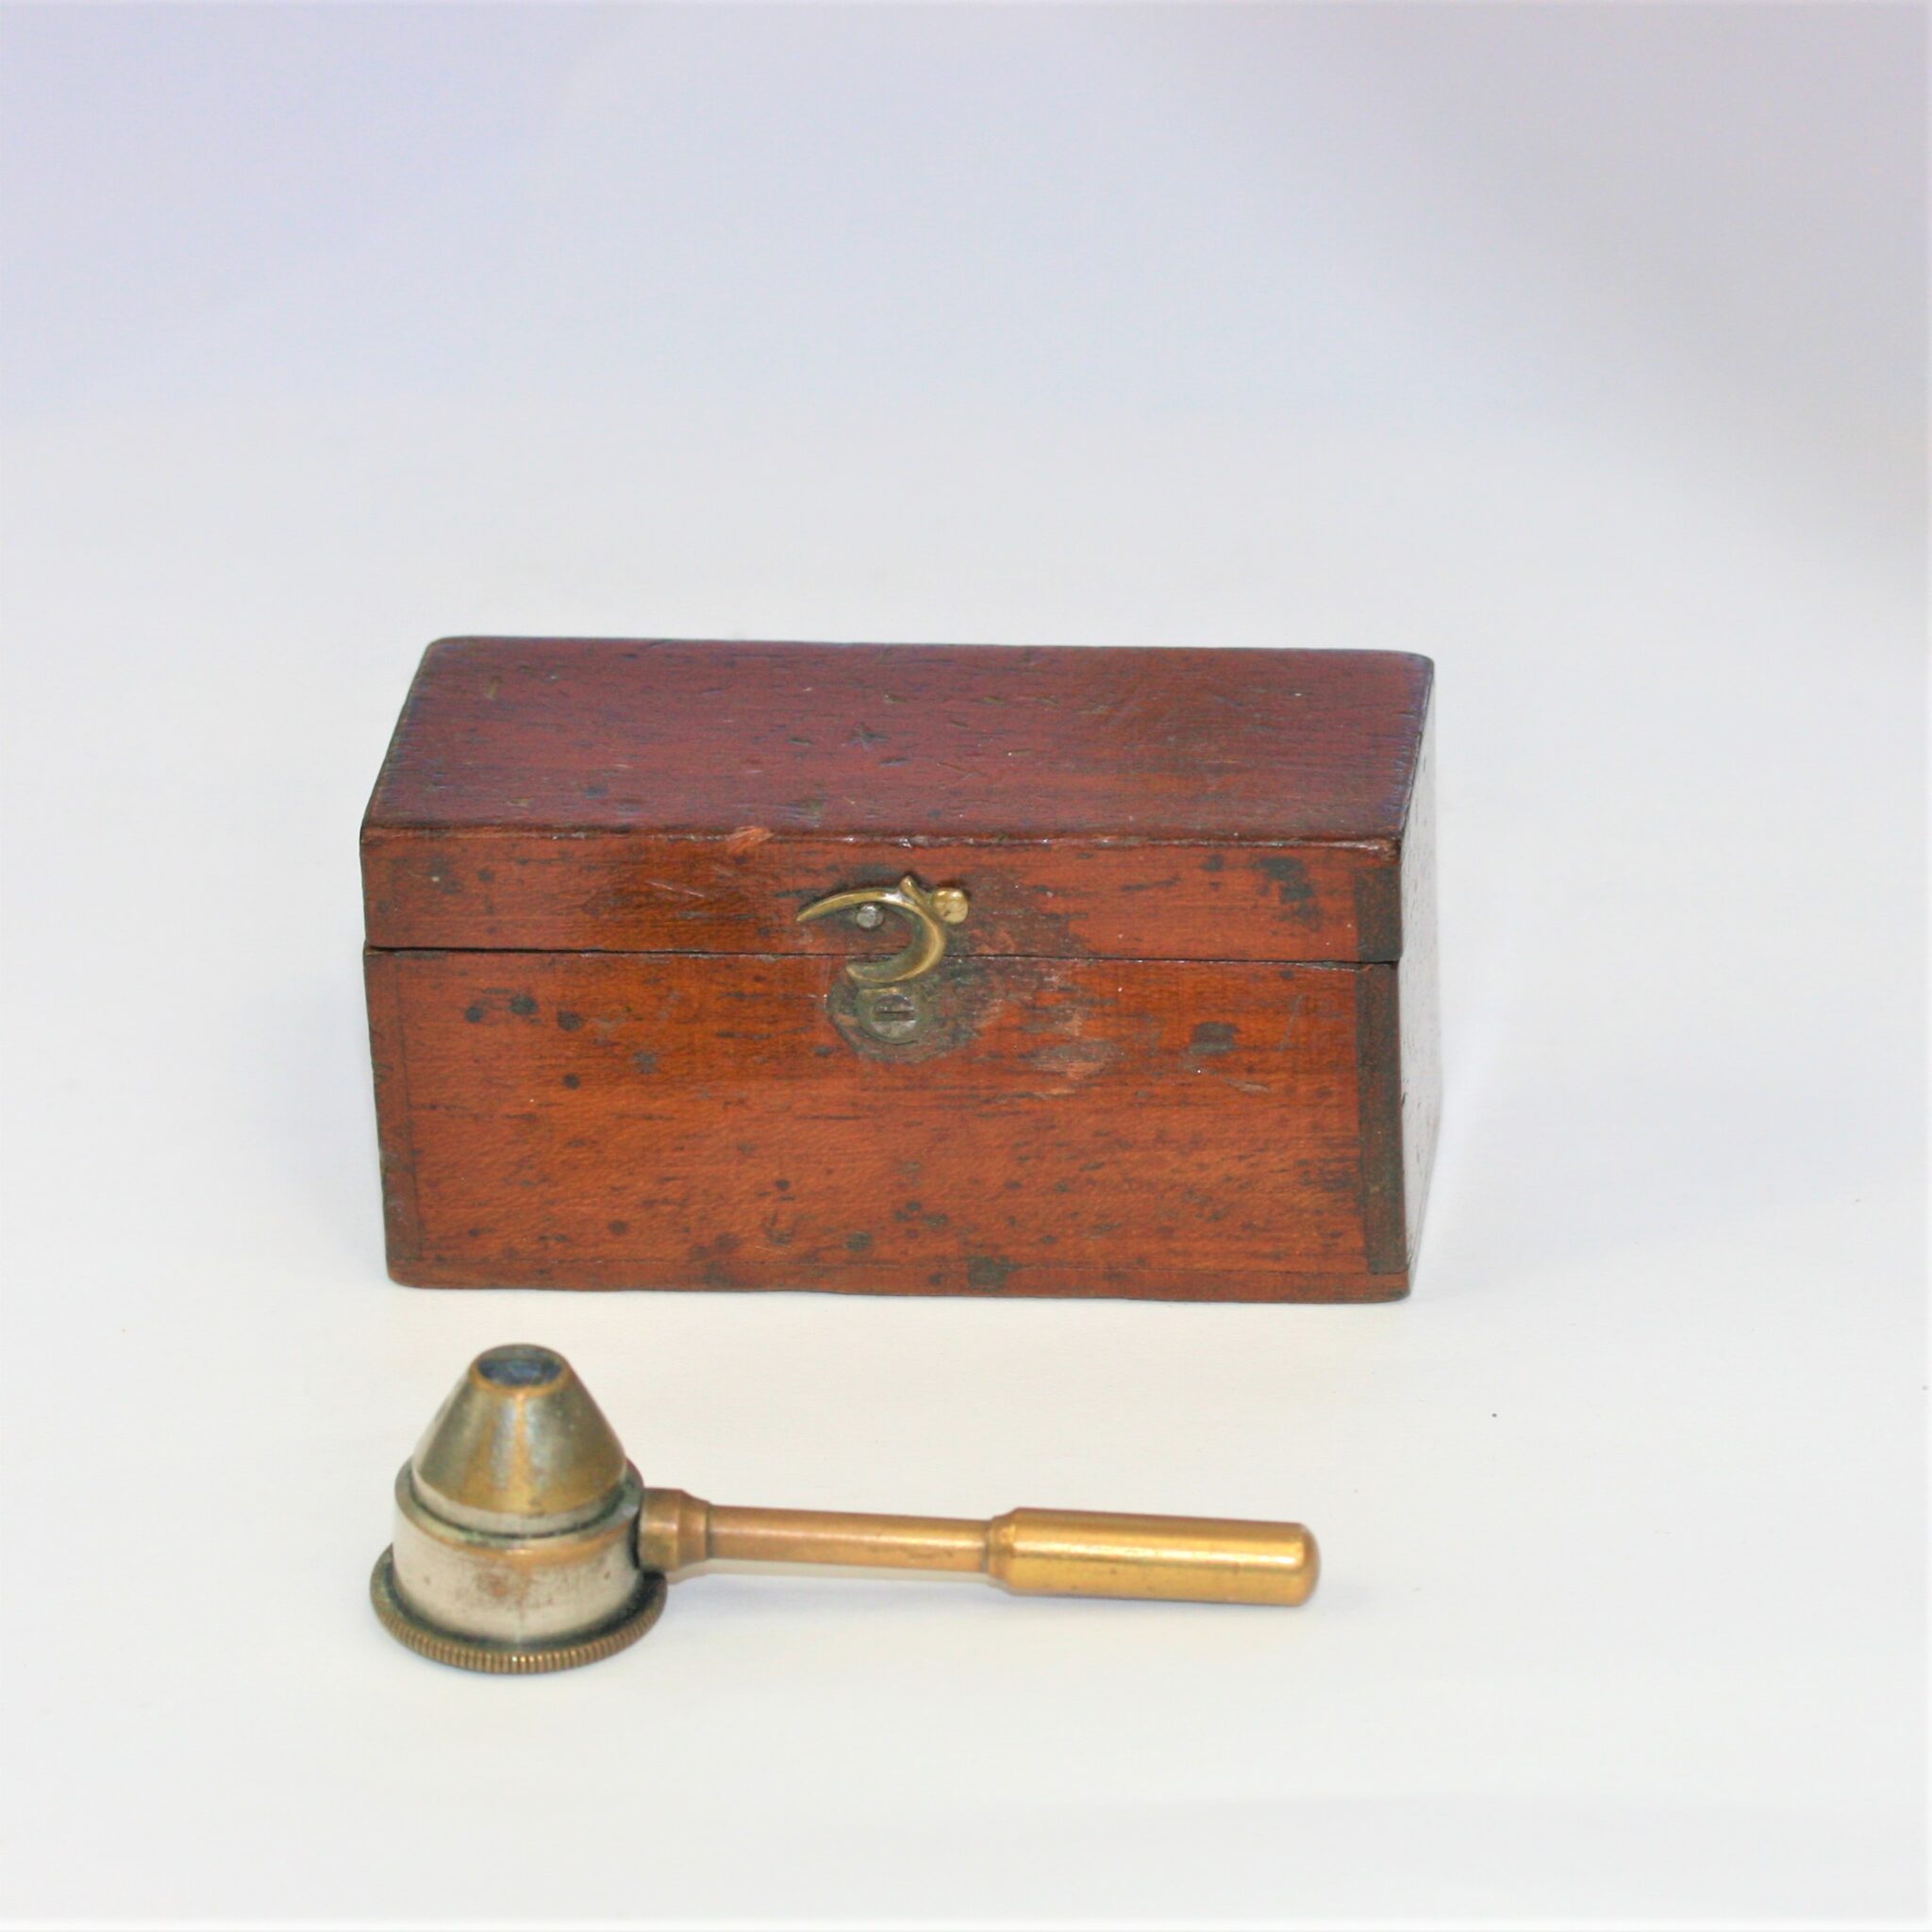 C1860 POCKET BRASS MICROSCOPE WITH ITS ORIGINAL BOX IN EXCELLENT CONDITION, IMAGE GOOD